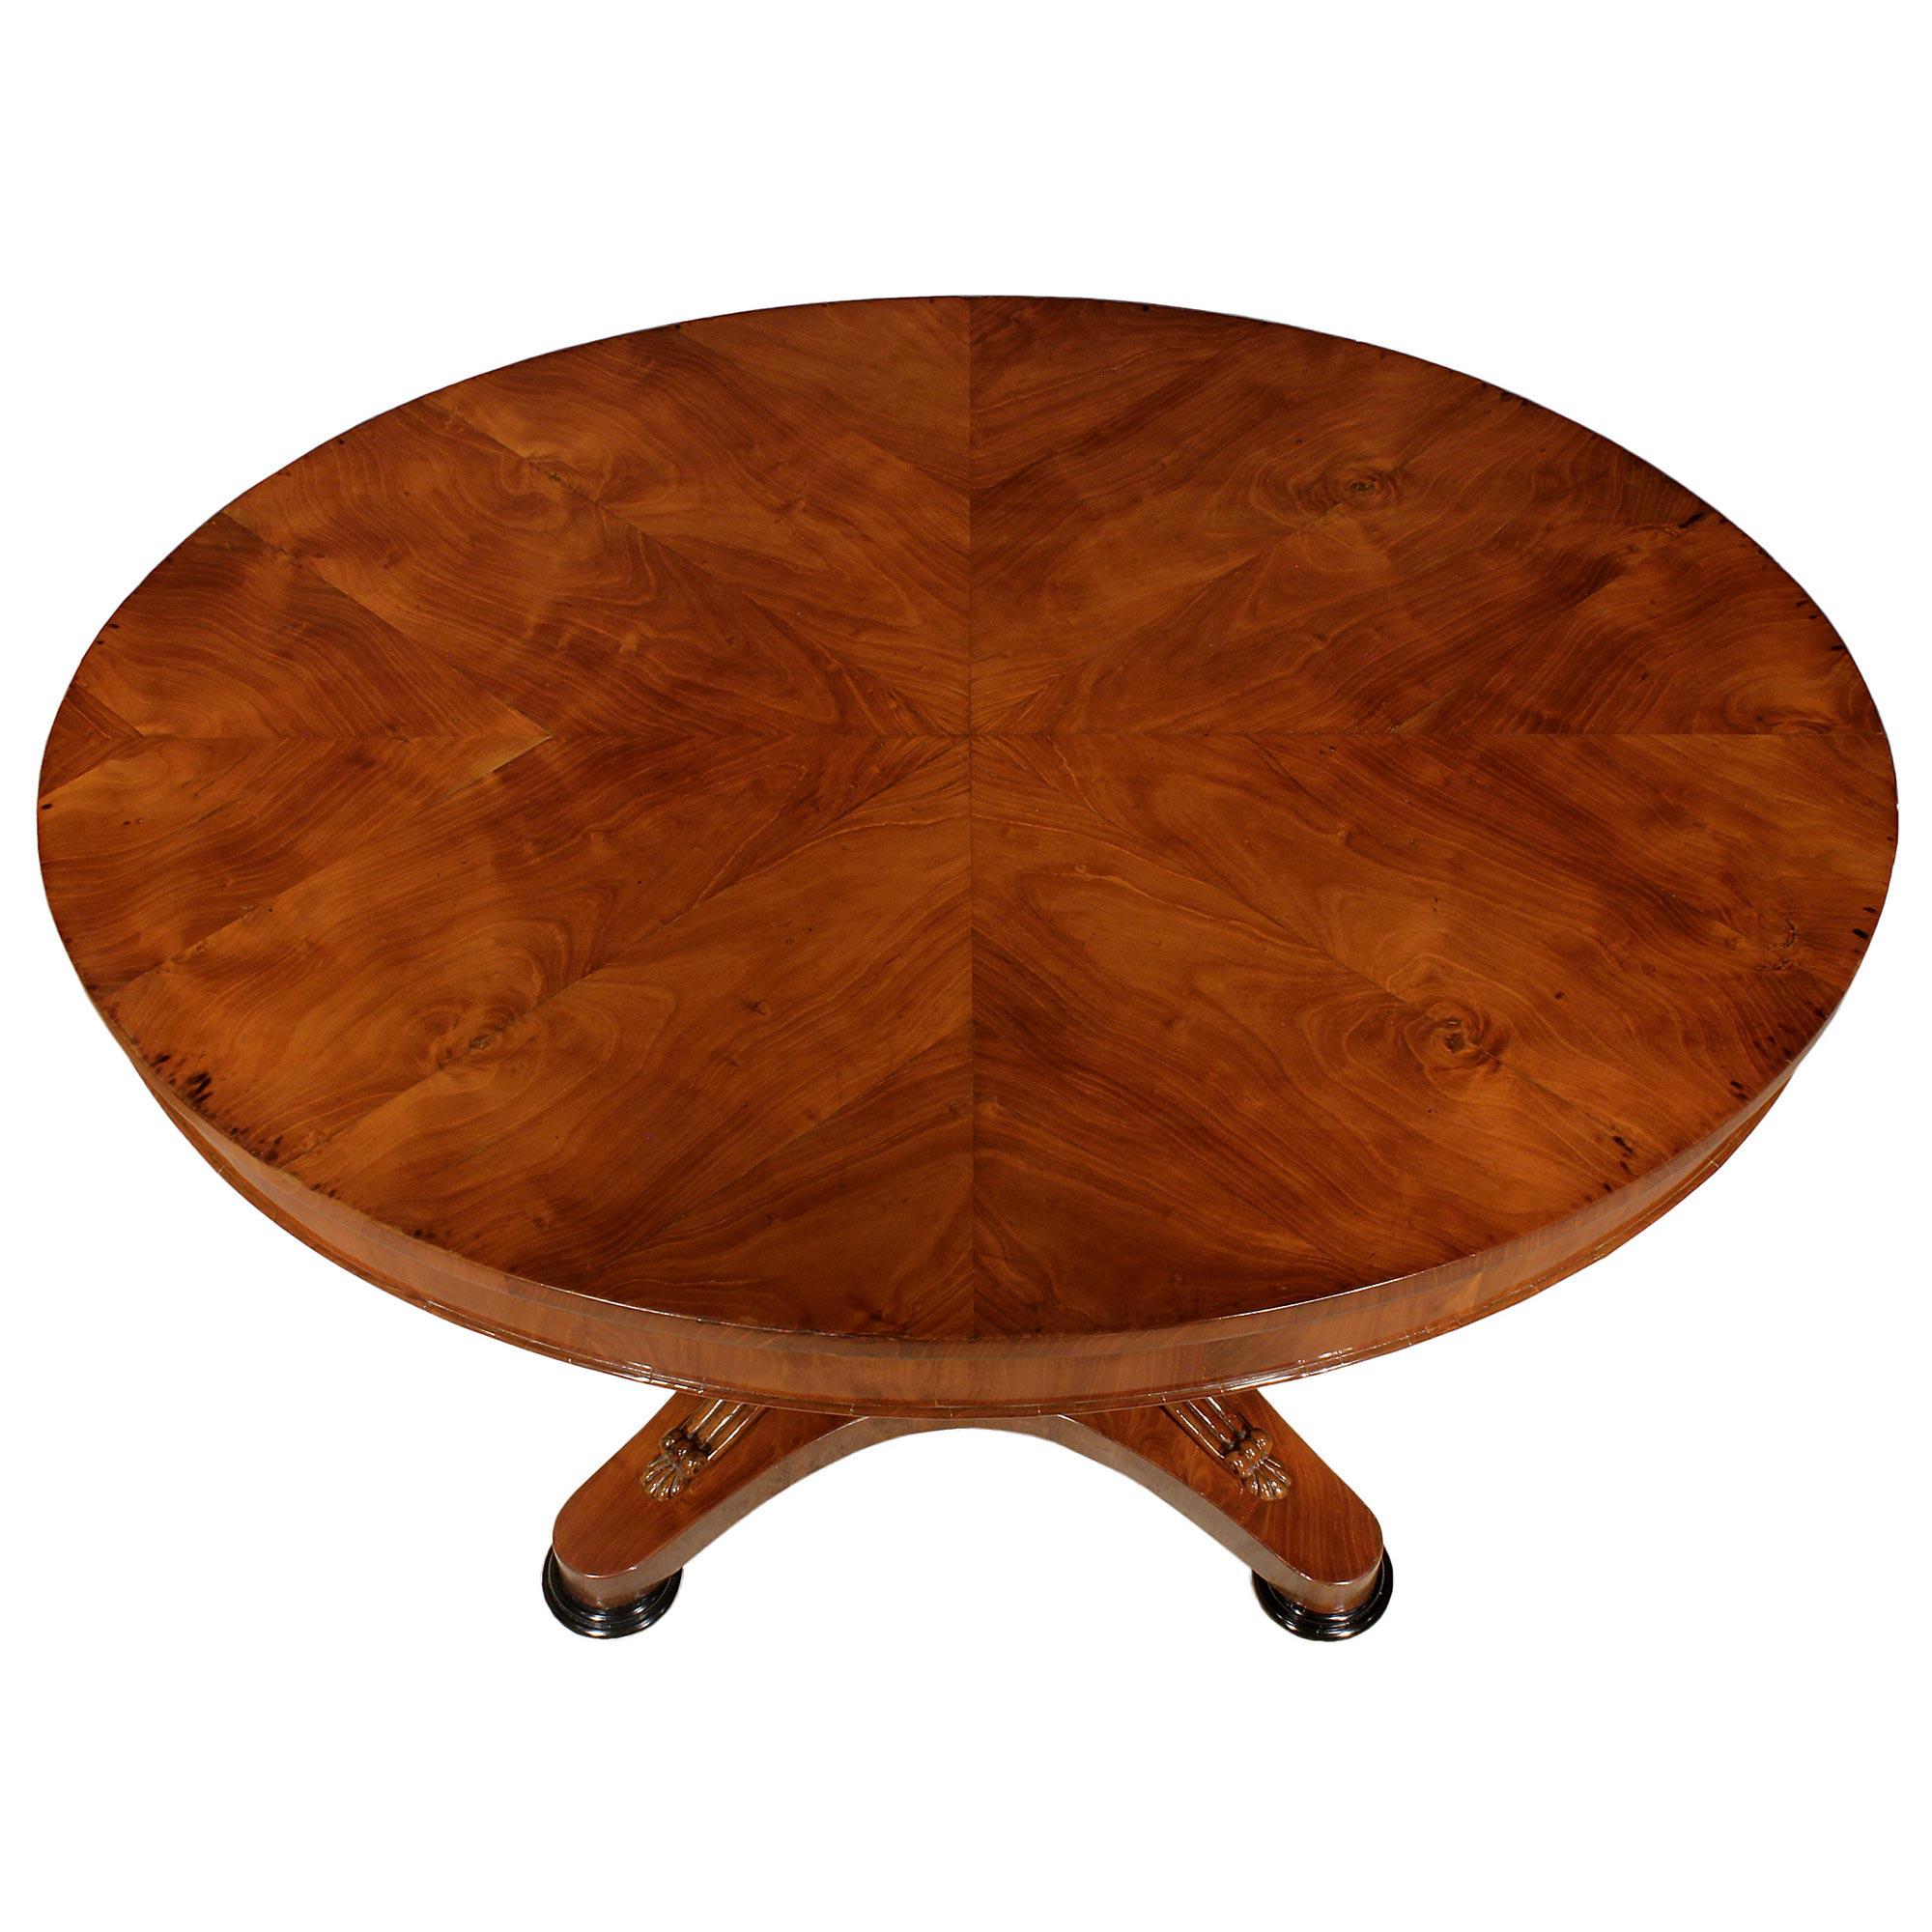 Unknown Continental Early 19th Century Mahogany Center Table For Sale